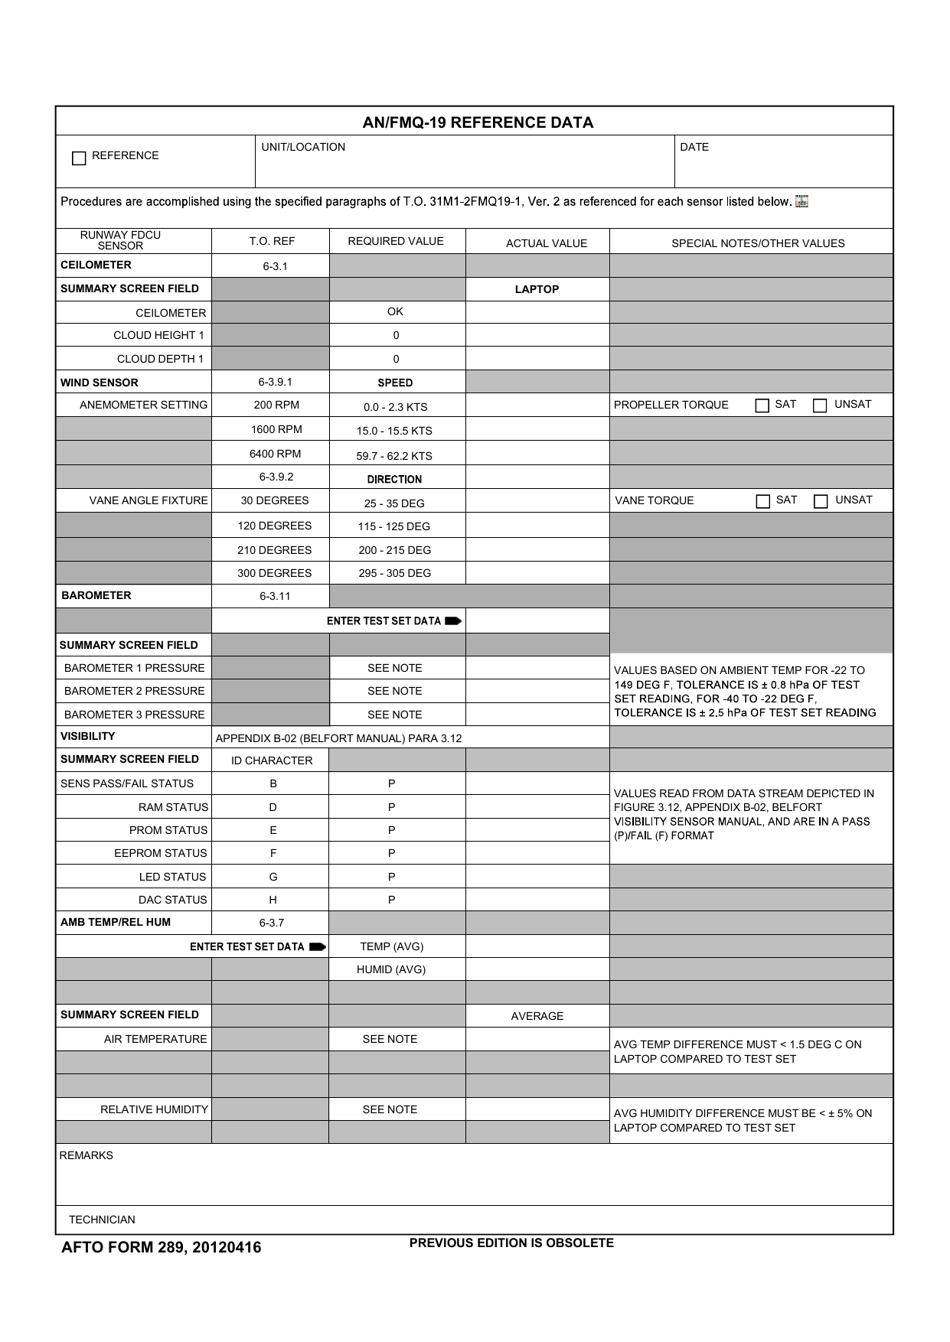 AFTO Form 289 An / Fmq-19 Reference Data, Page 1